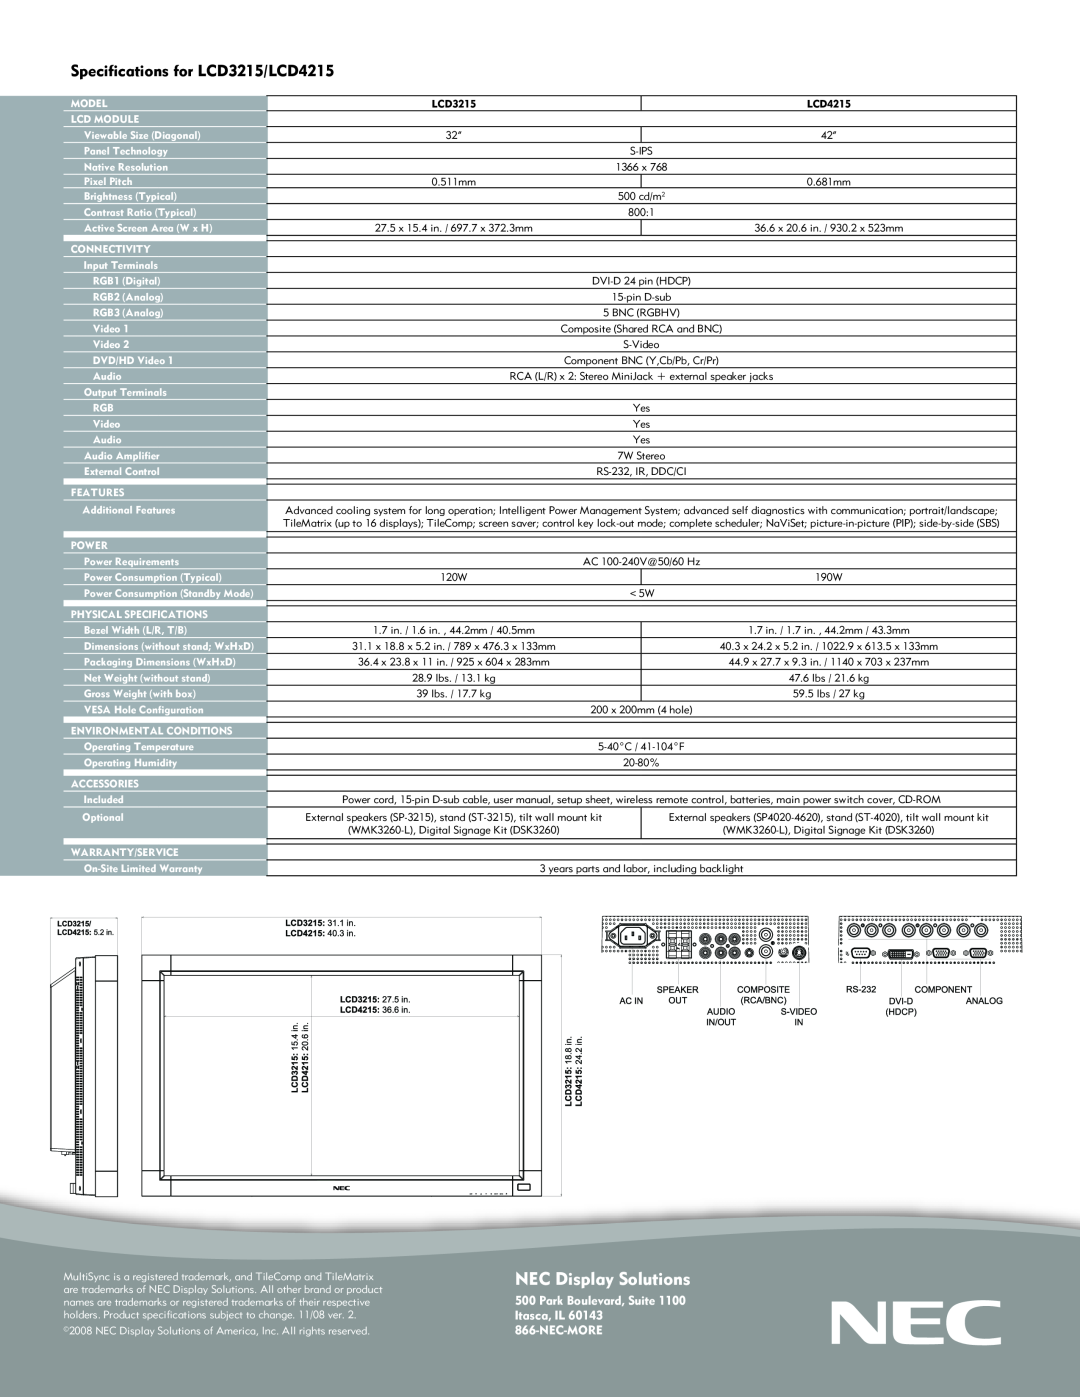 NEC manual NEC Display Solutions, Specifications for LCD3215/LCD4215, Park Boulevard, Suite Itasca, IL 866-NEC-MORE 